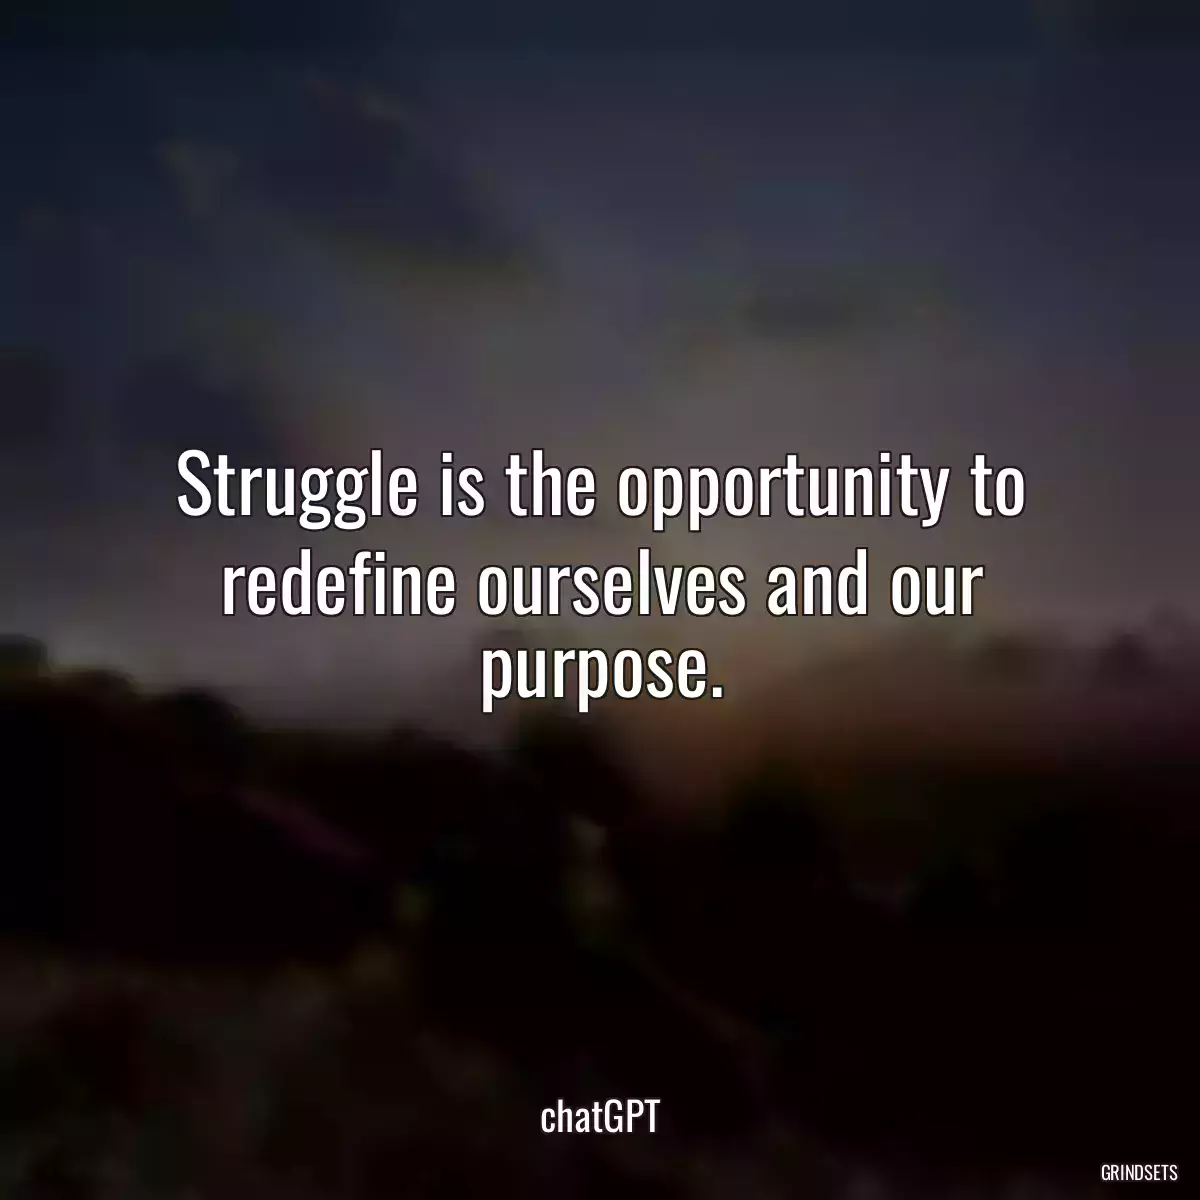 Struggle is the opportunity to redefine ourselves and our purpose.